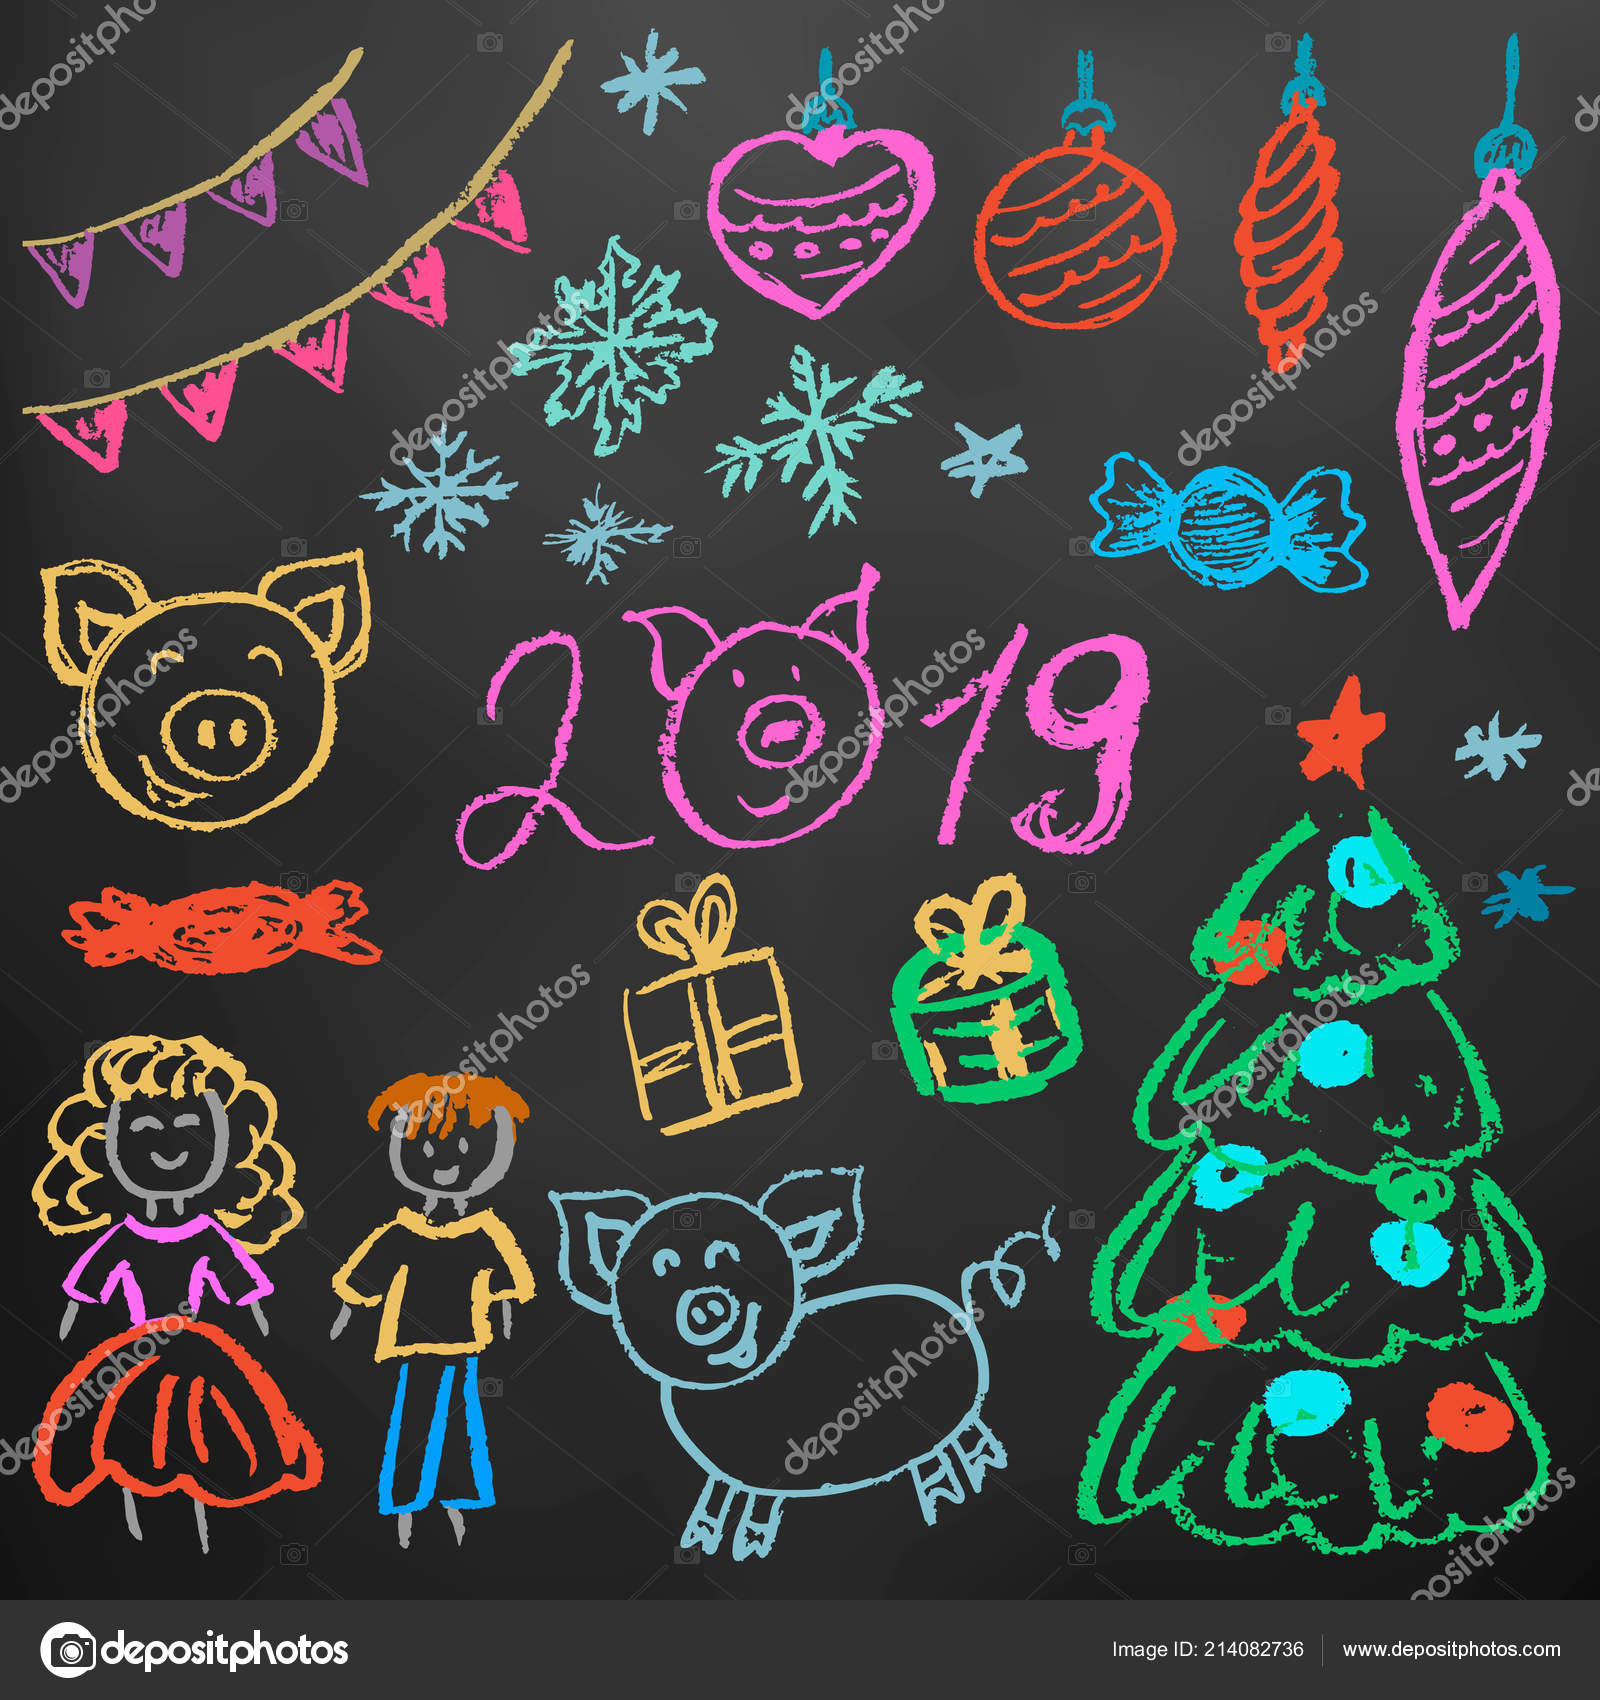 New Year 2019 New Year's Set Elements Your Creativity Children's